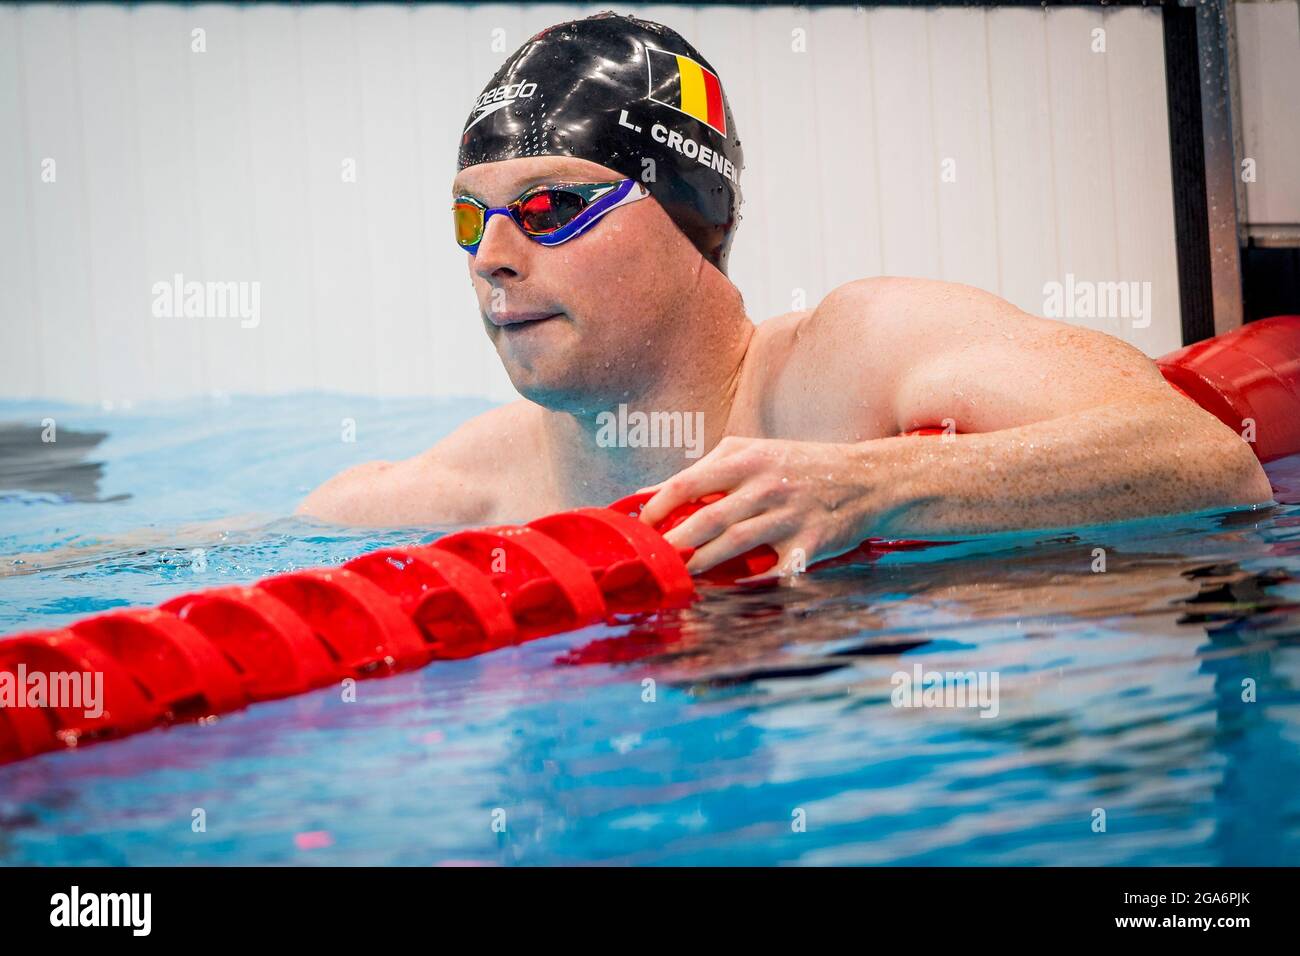 Belgian swimmer Louis Croenen pictured in action during the heats of the men's 100m butterfly swimming event on the seventh day of the 'Tokyo 2020 Oly Stock Photo